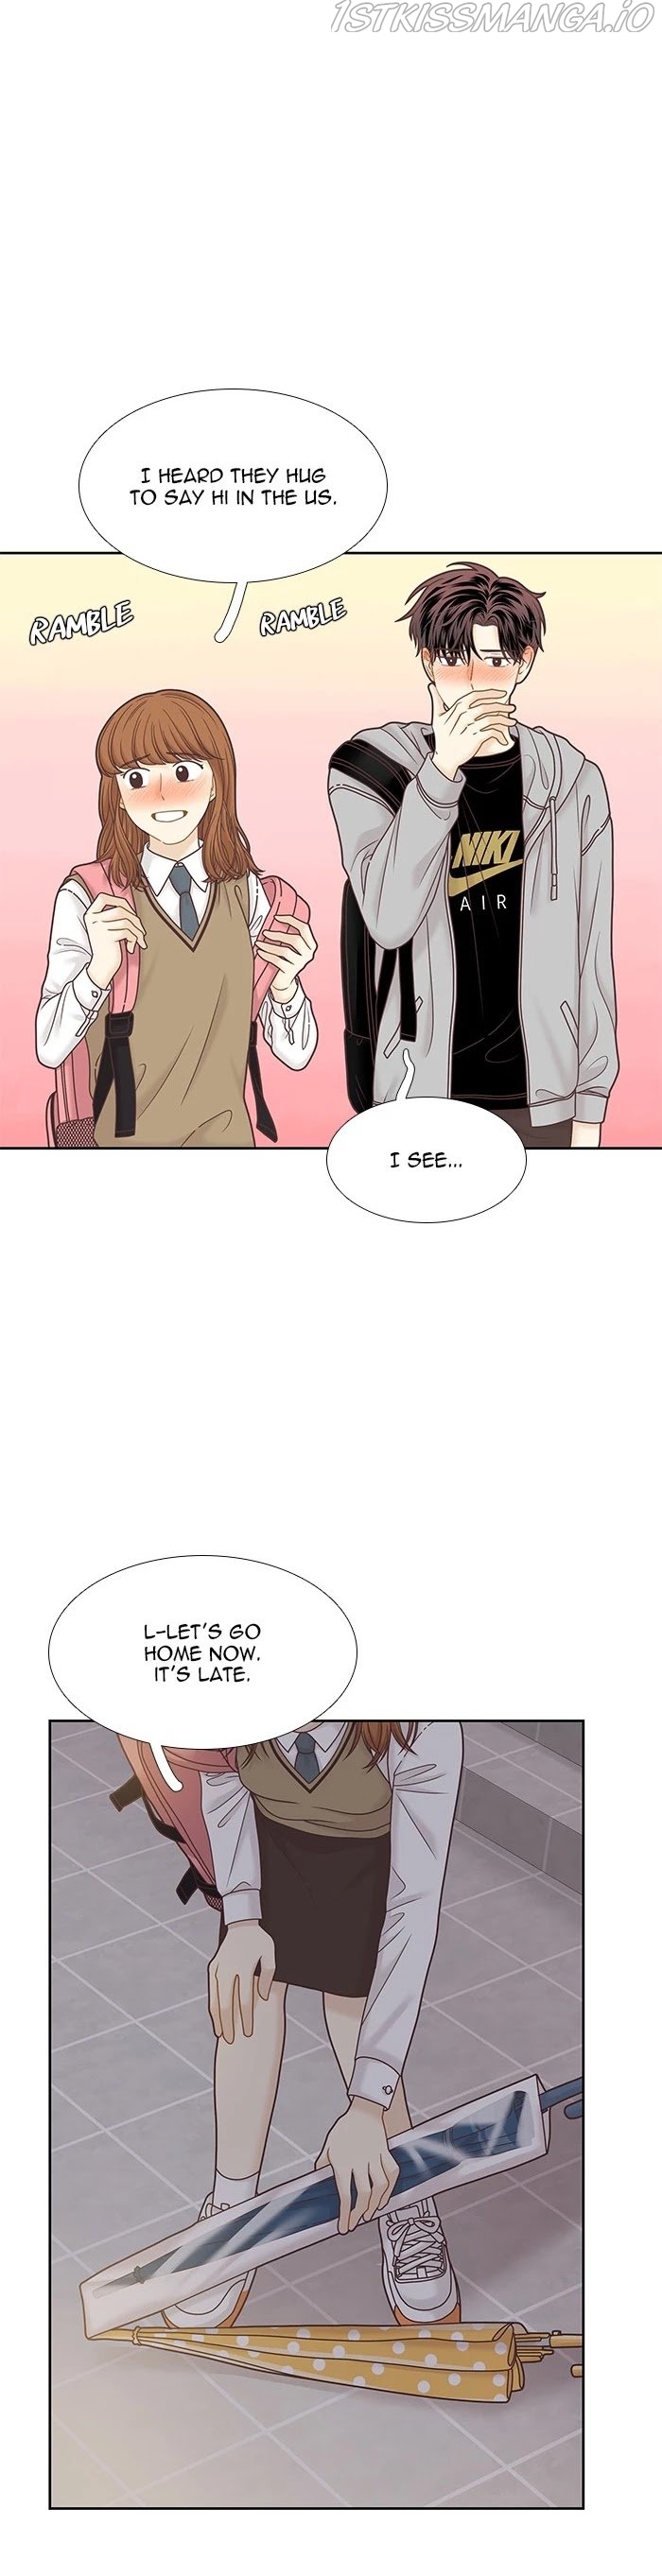 Girl’s World ( World of Girl ) Chapter 288 - Page 3